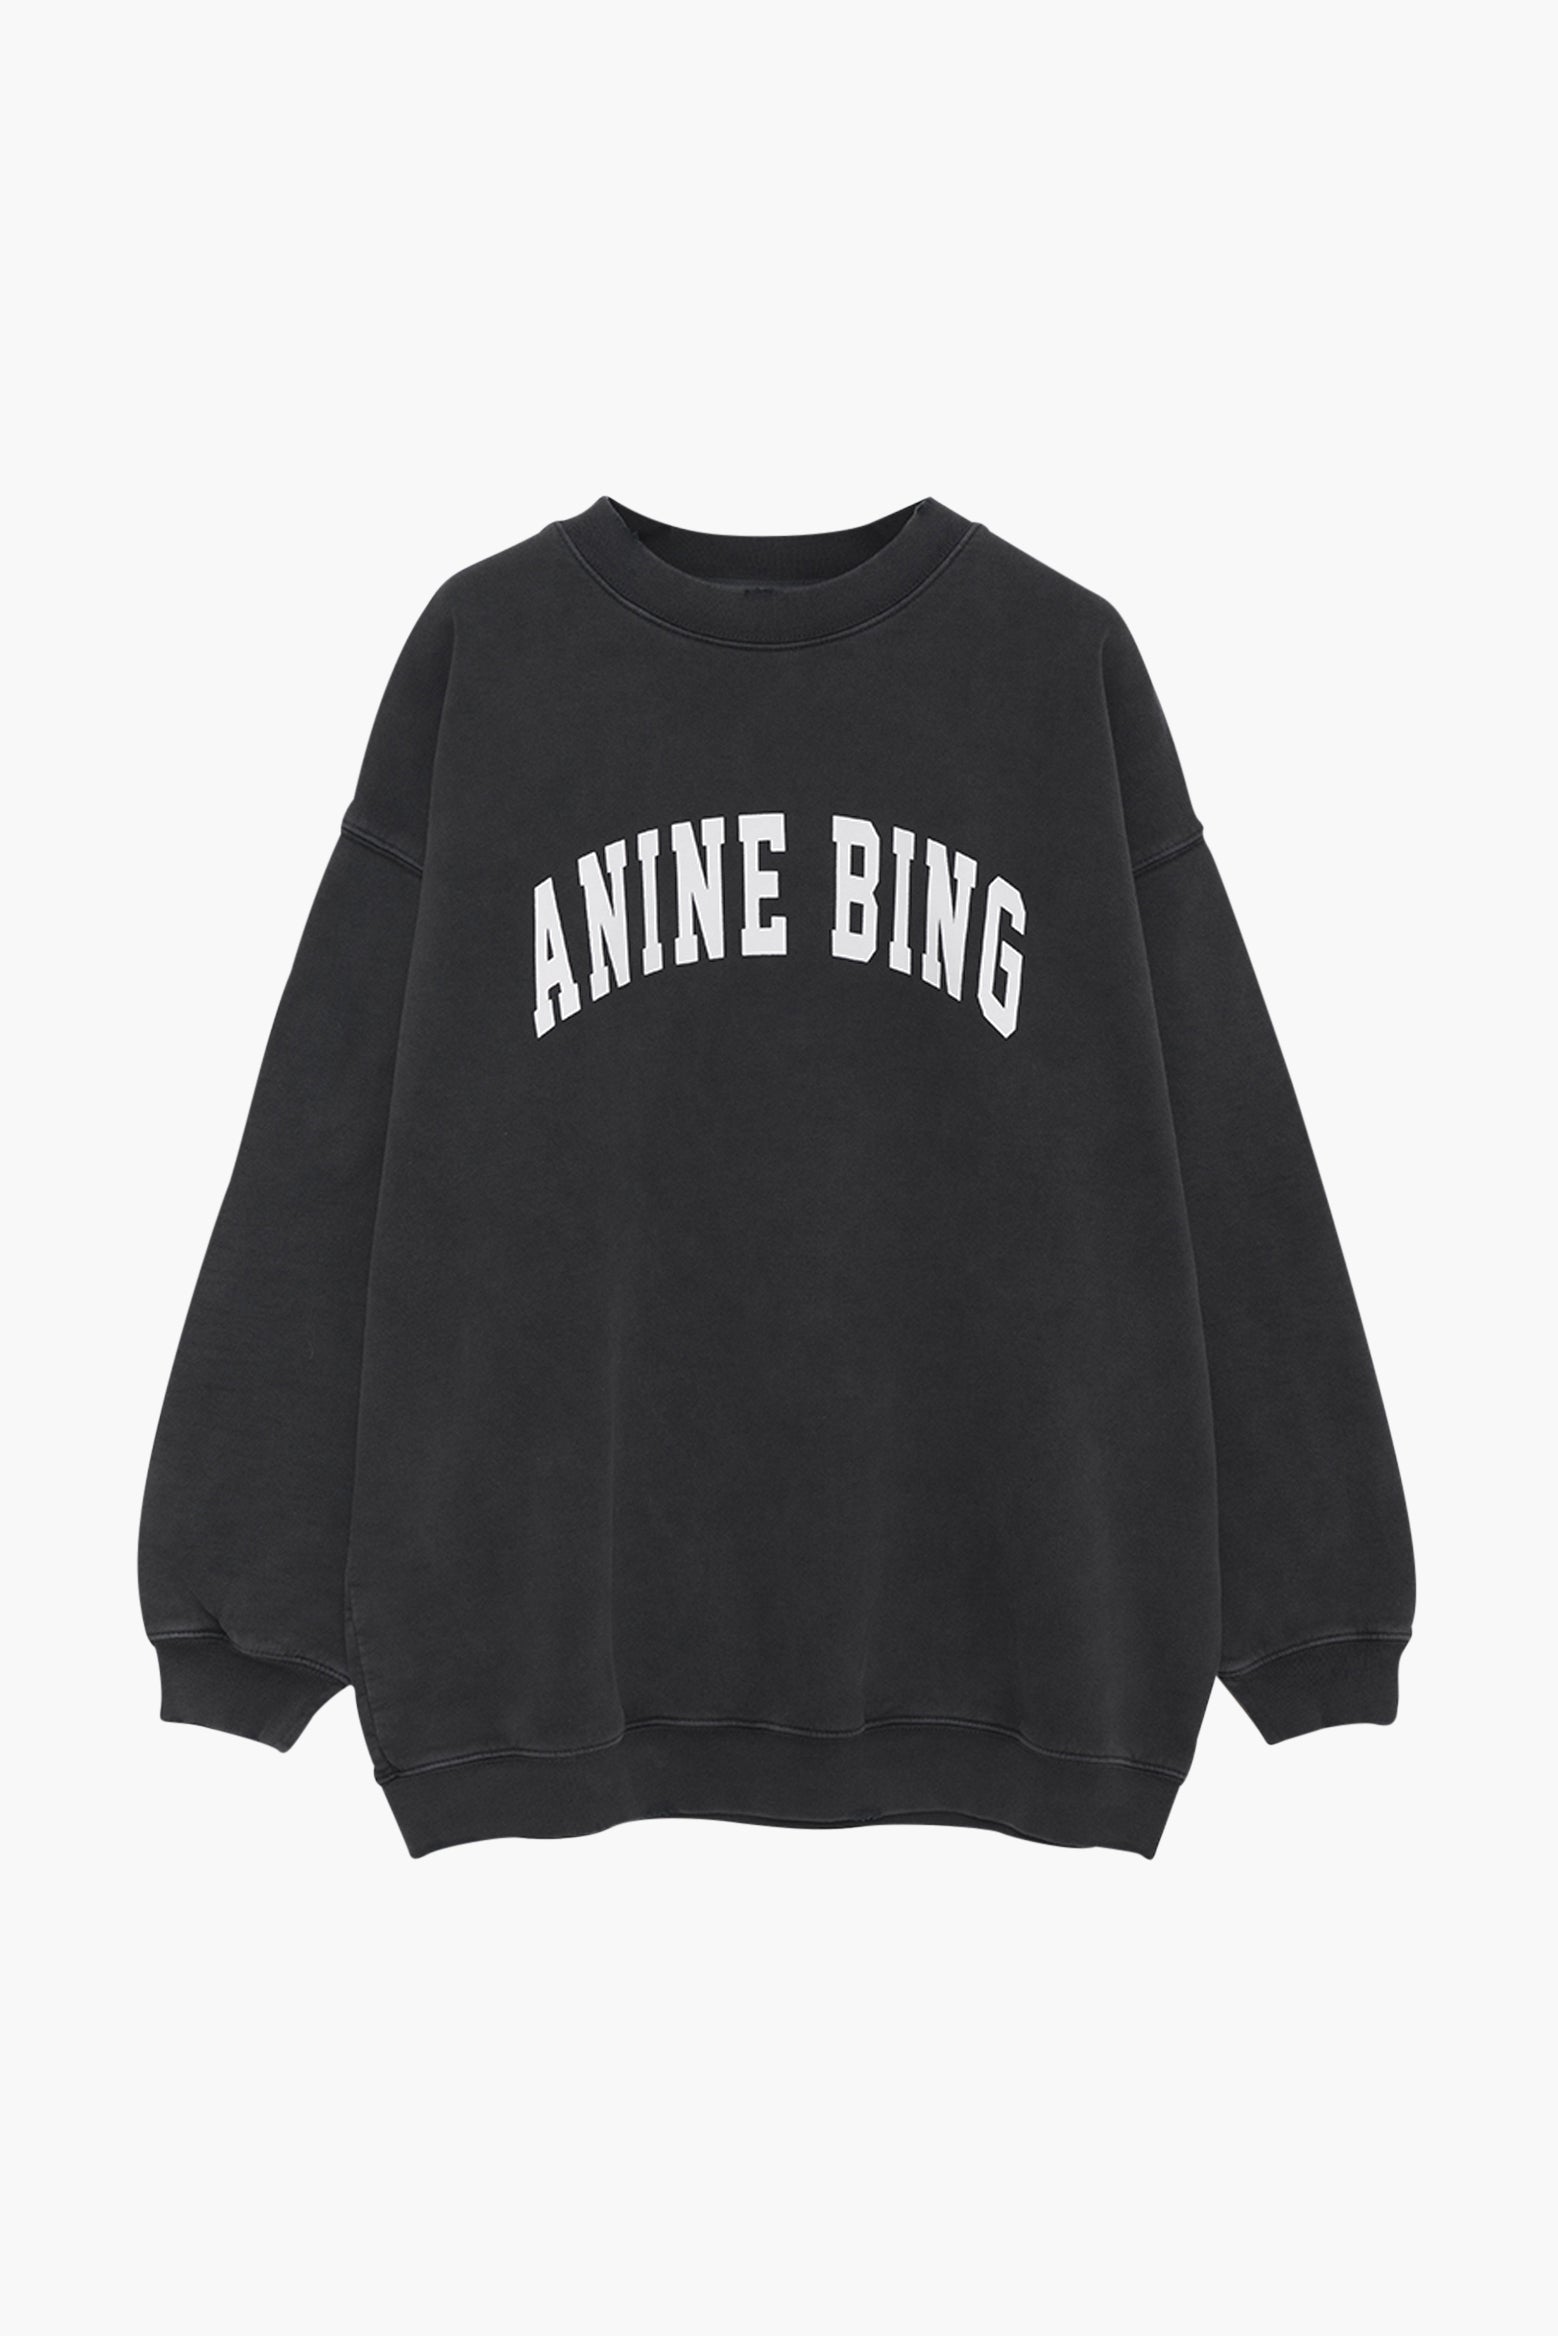 Anine Bing Tyler Sweatshirt in Washed Black available at TNT The New Trend Australia.